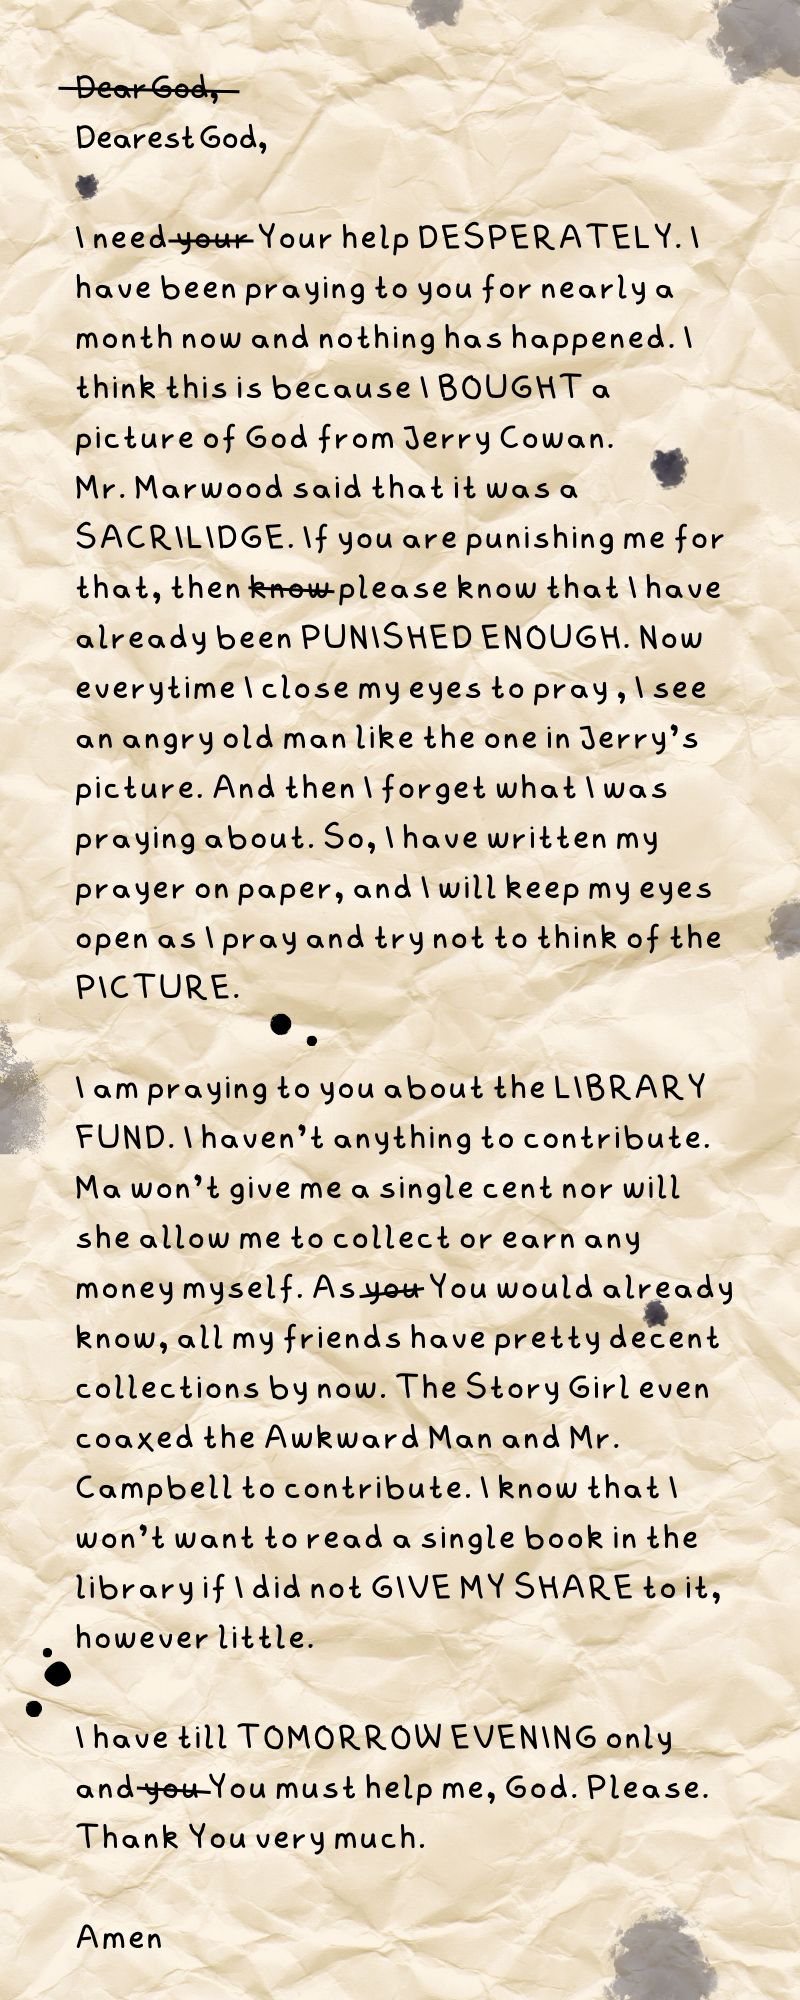 Handwritten prayer written as a letter to Dearest God, with misspellings and words crossed out.